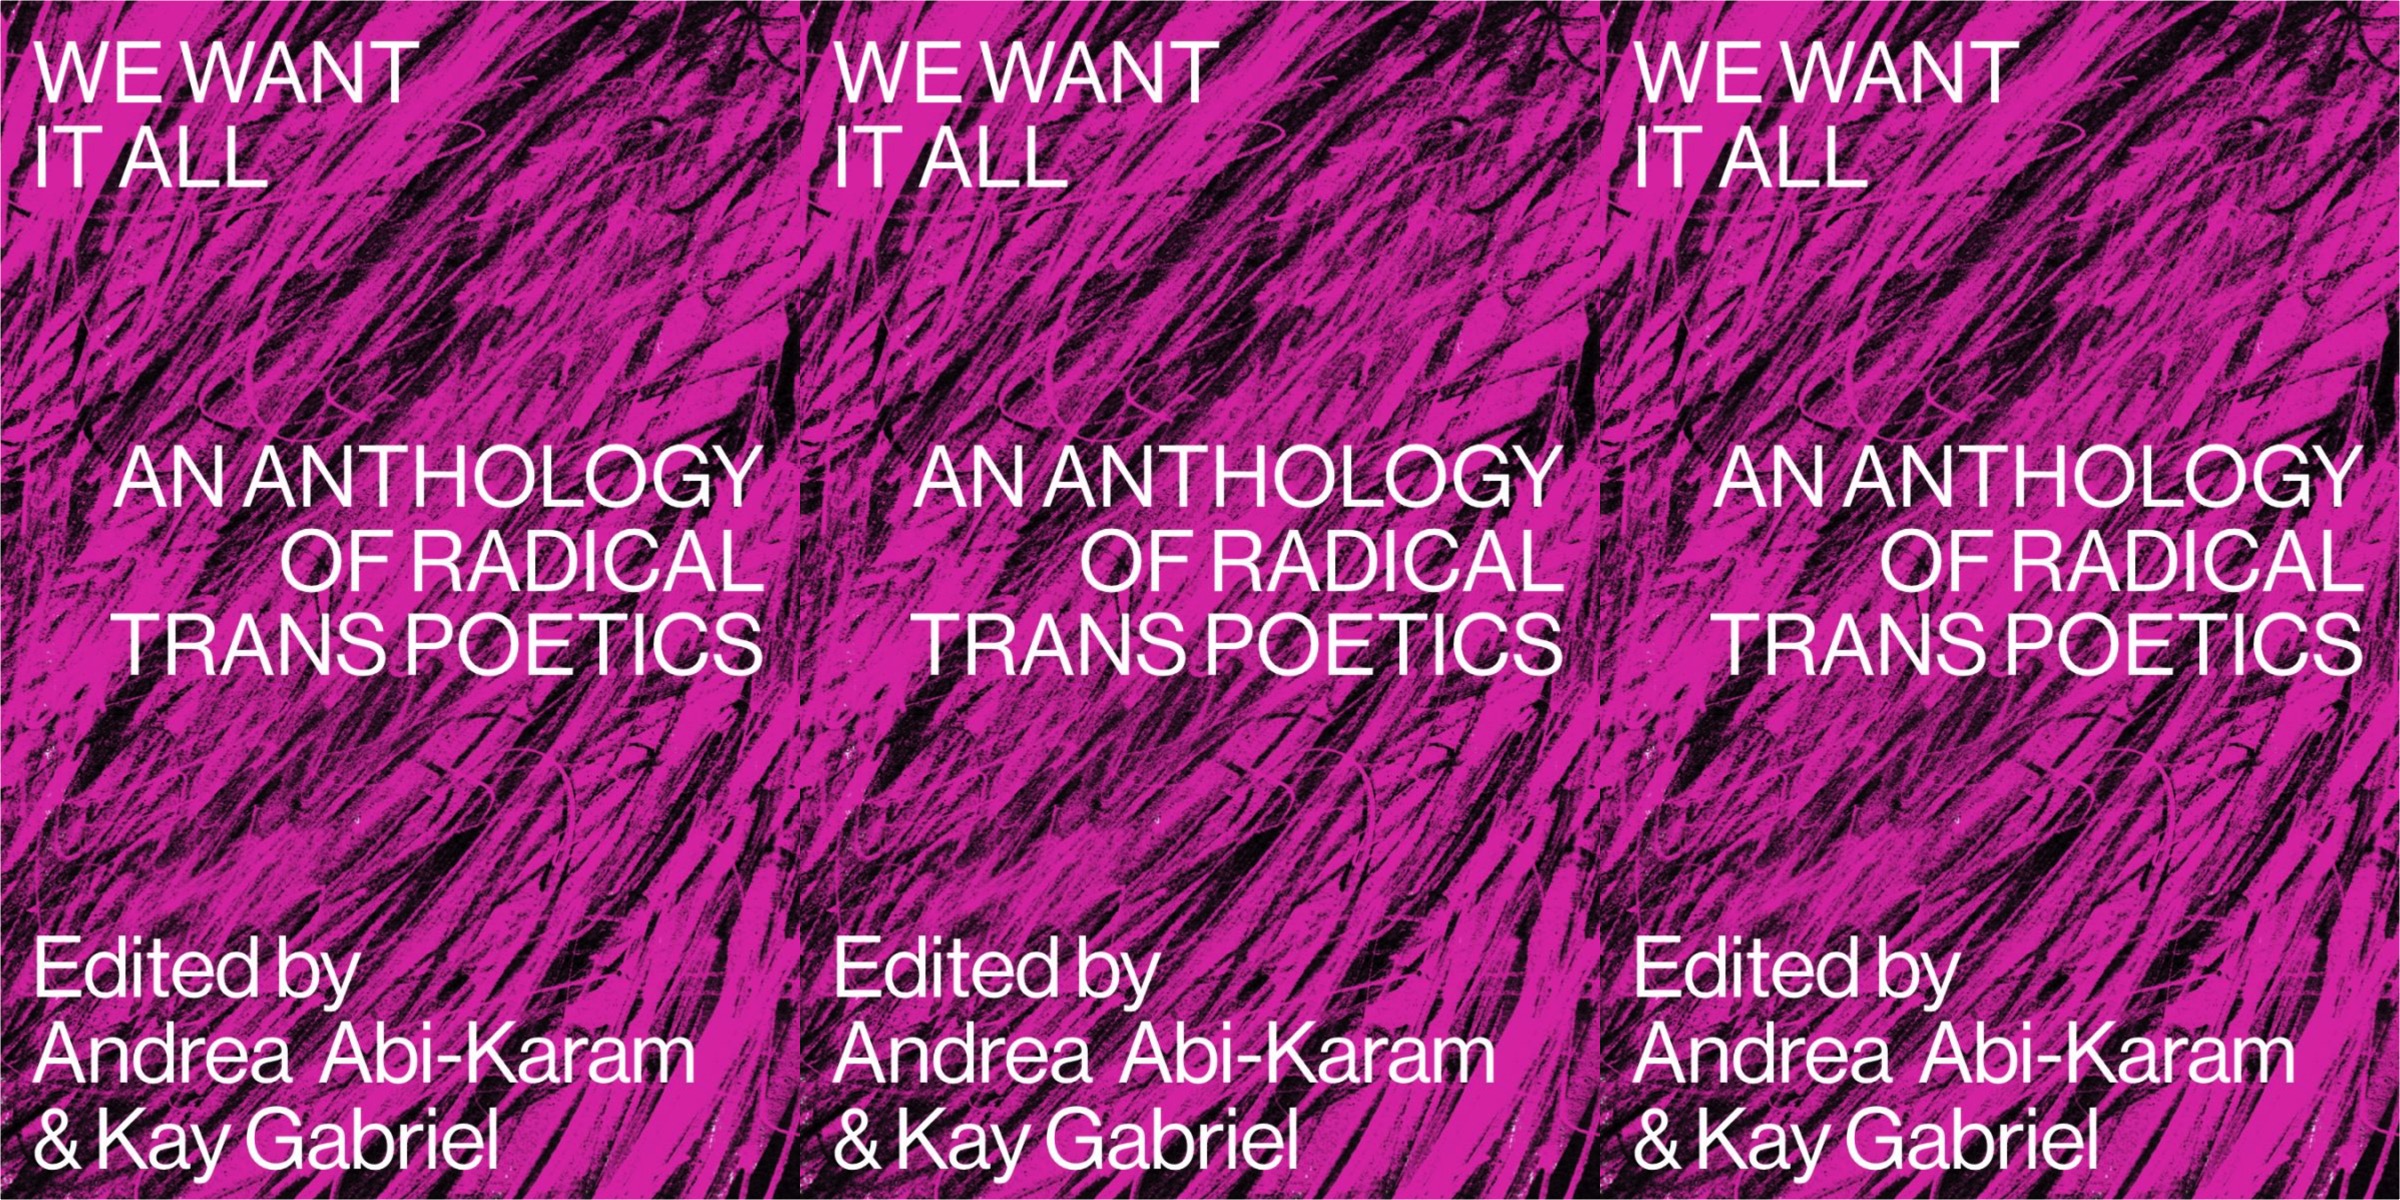 Three repeating images of the cover of We Want It All: An Anthology of Radical Trans Poetics, with white text printed on a pink&black scribbled background